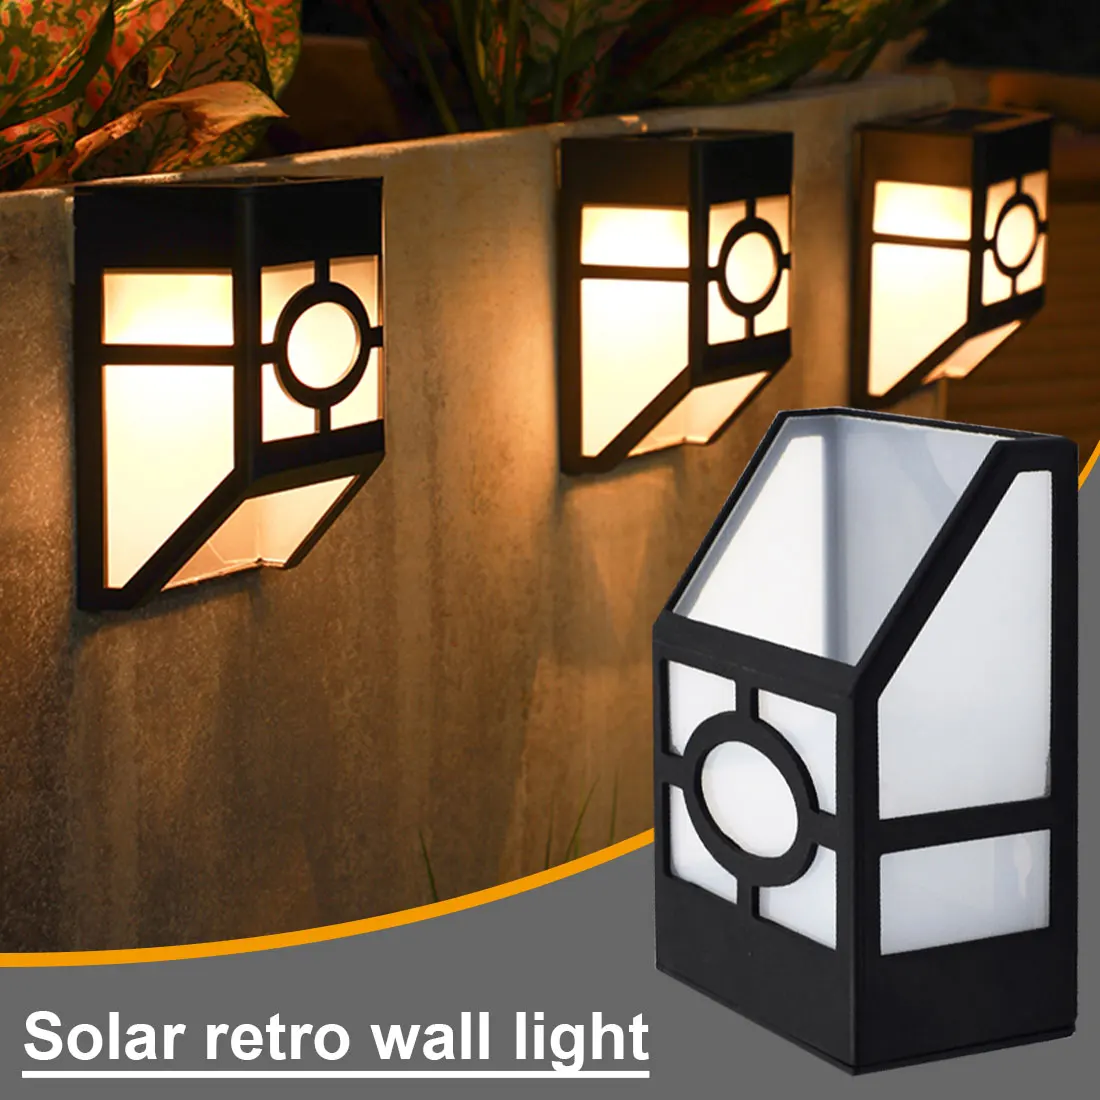 

LED Solar Light Outdoor Wall Lamp Corridor Staircase Light IP65 Waterproof 3 Lighting Colors Lights up automatically at night